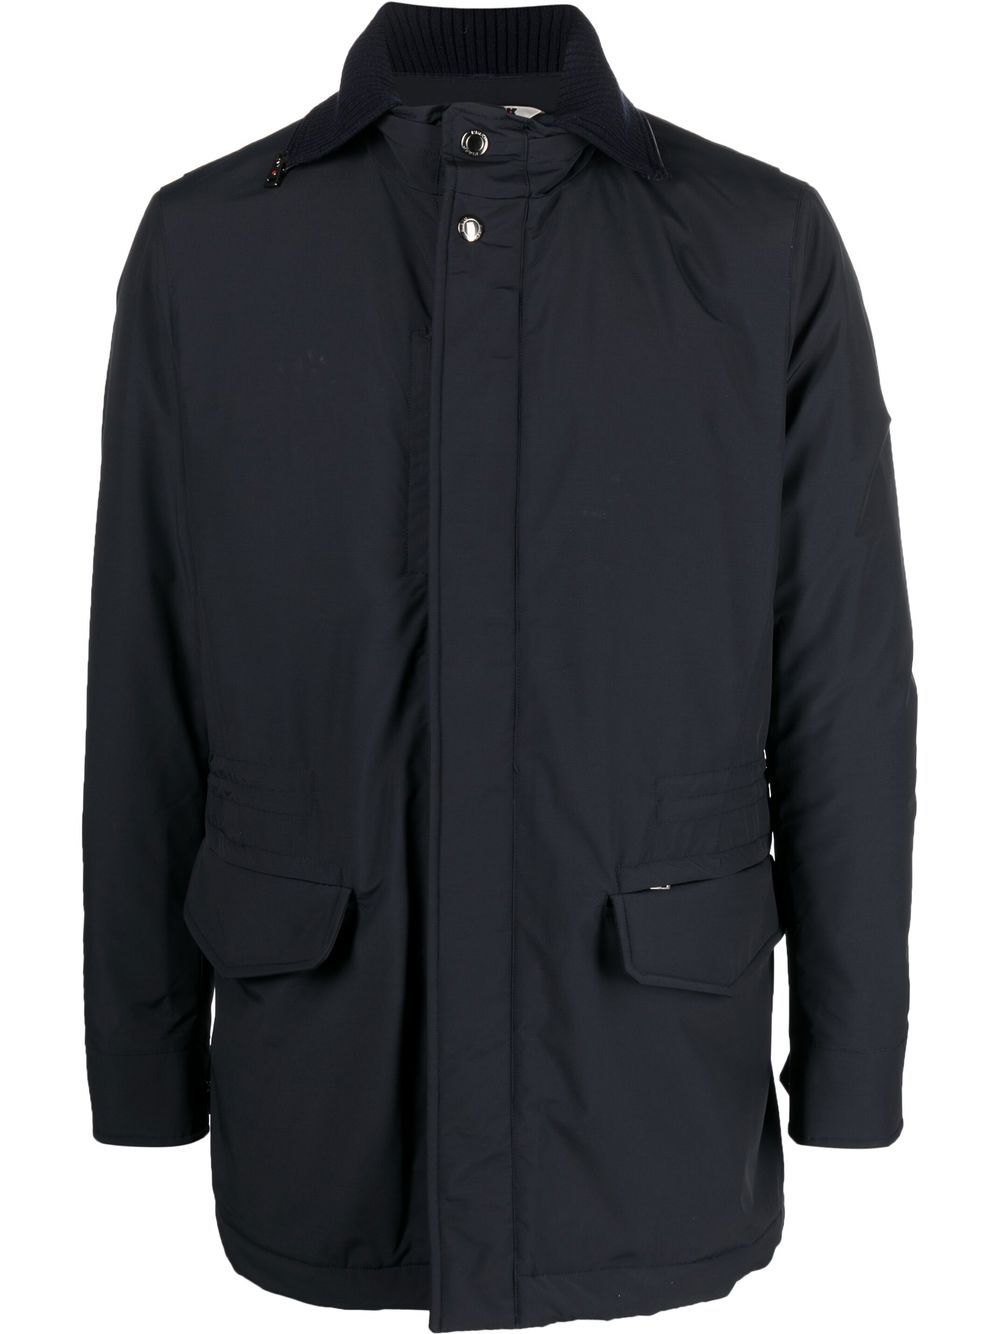 Kired long-sleeve Quilted Jacket - Farfetch